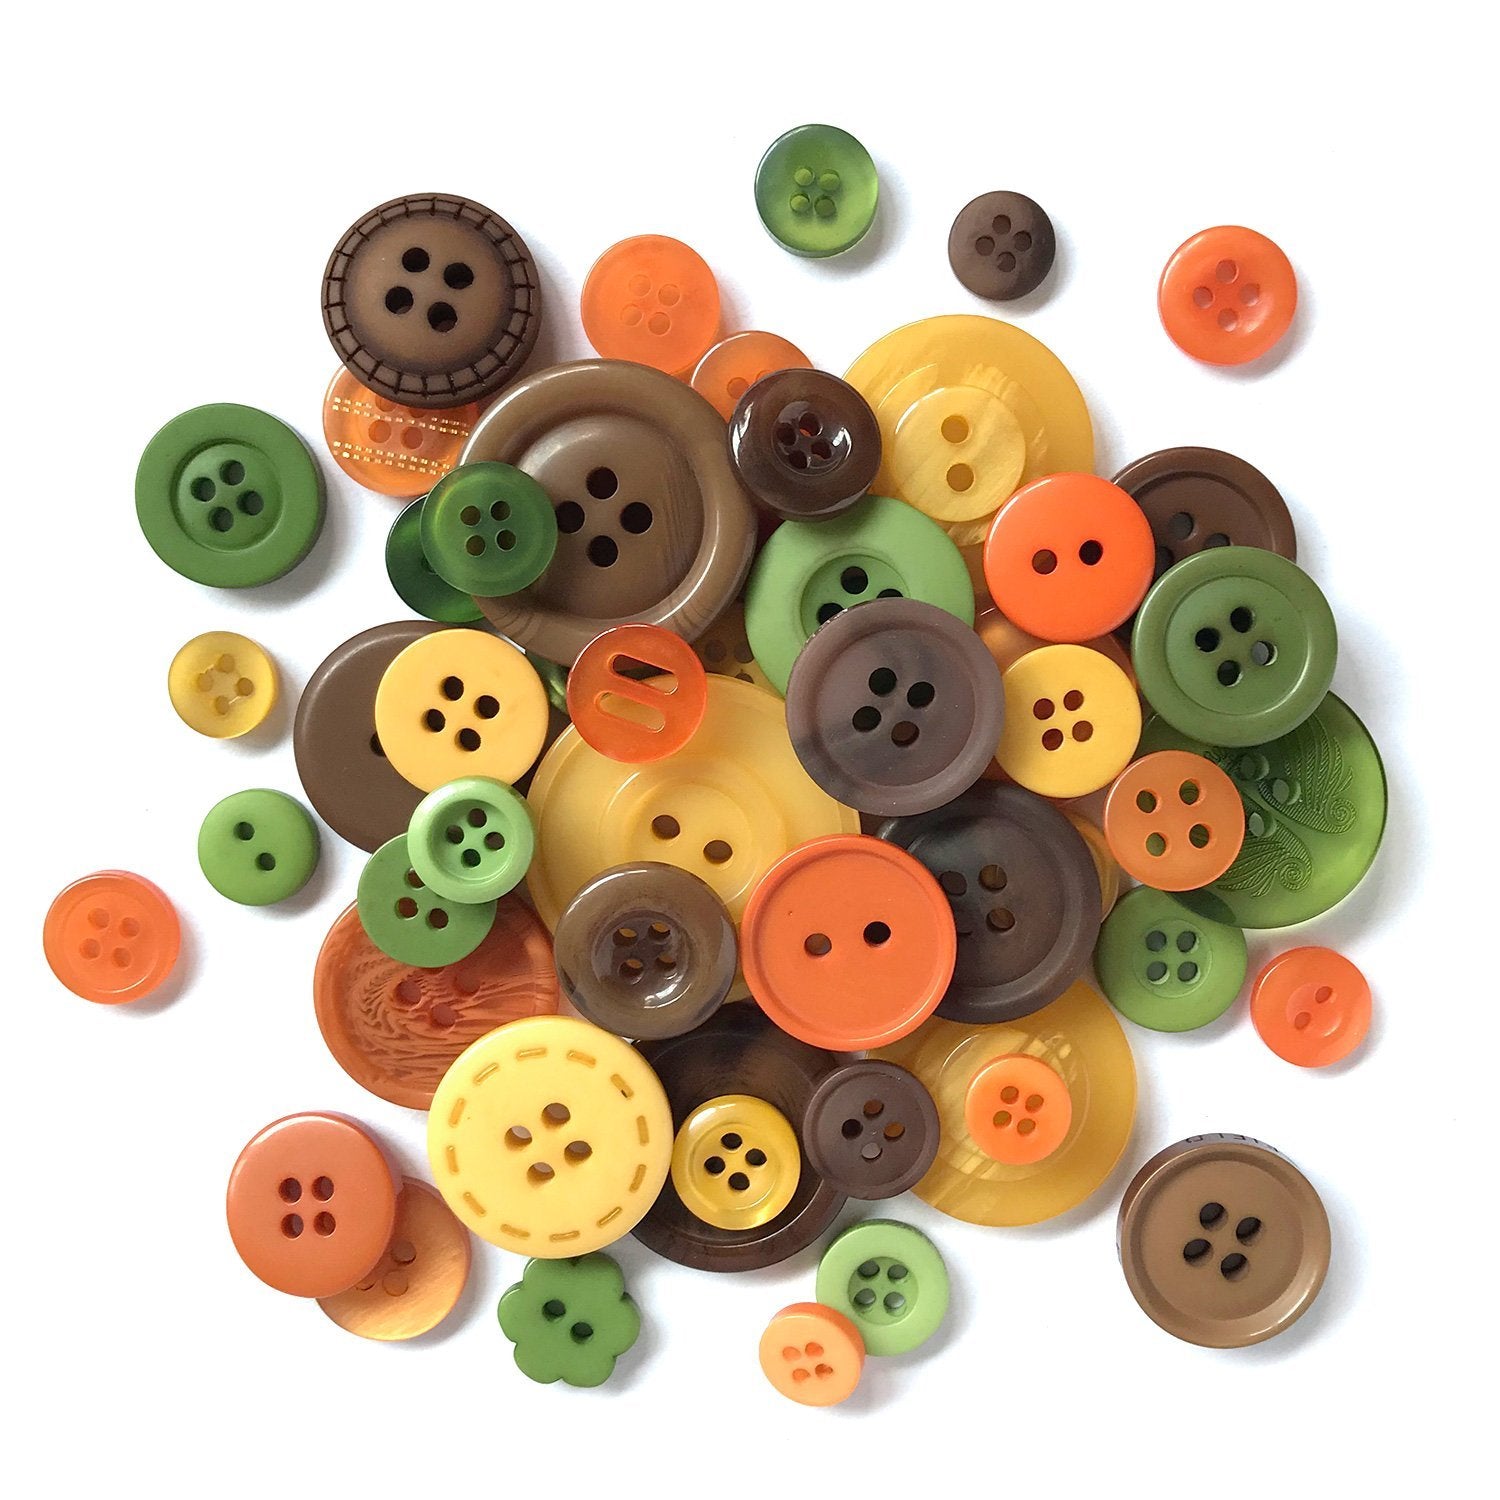 Button Basics, Colorful Sewing Buttons & More